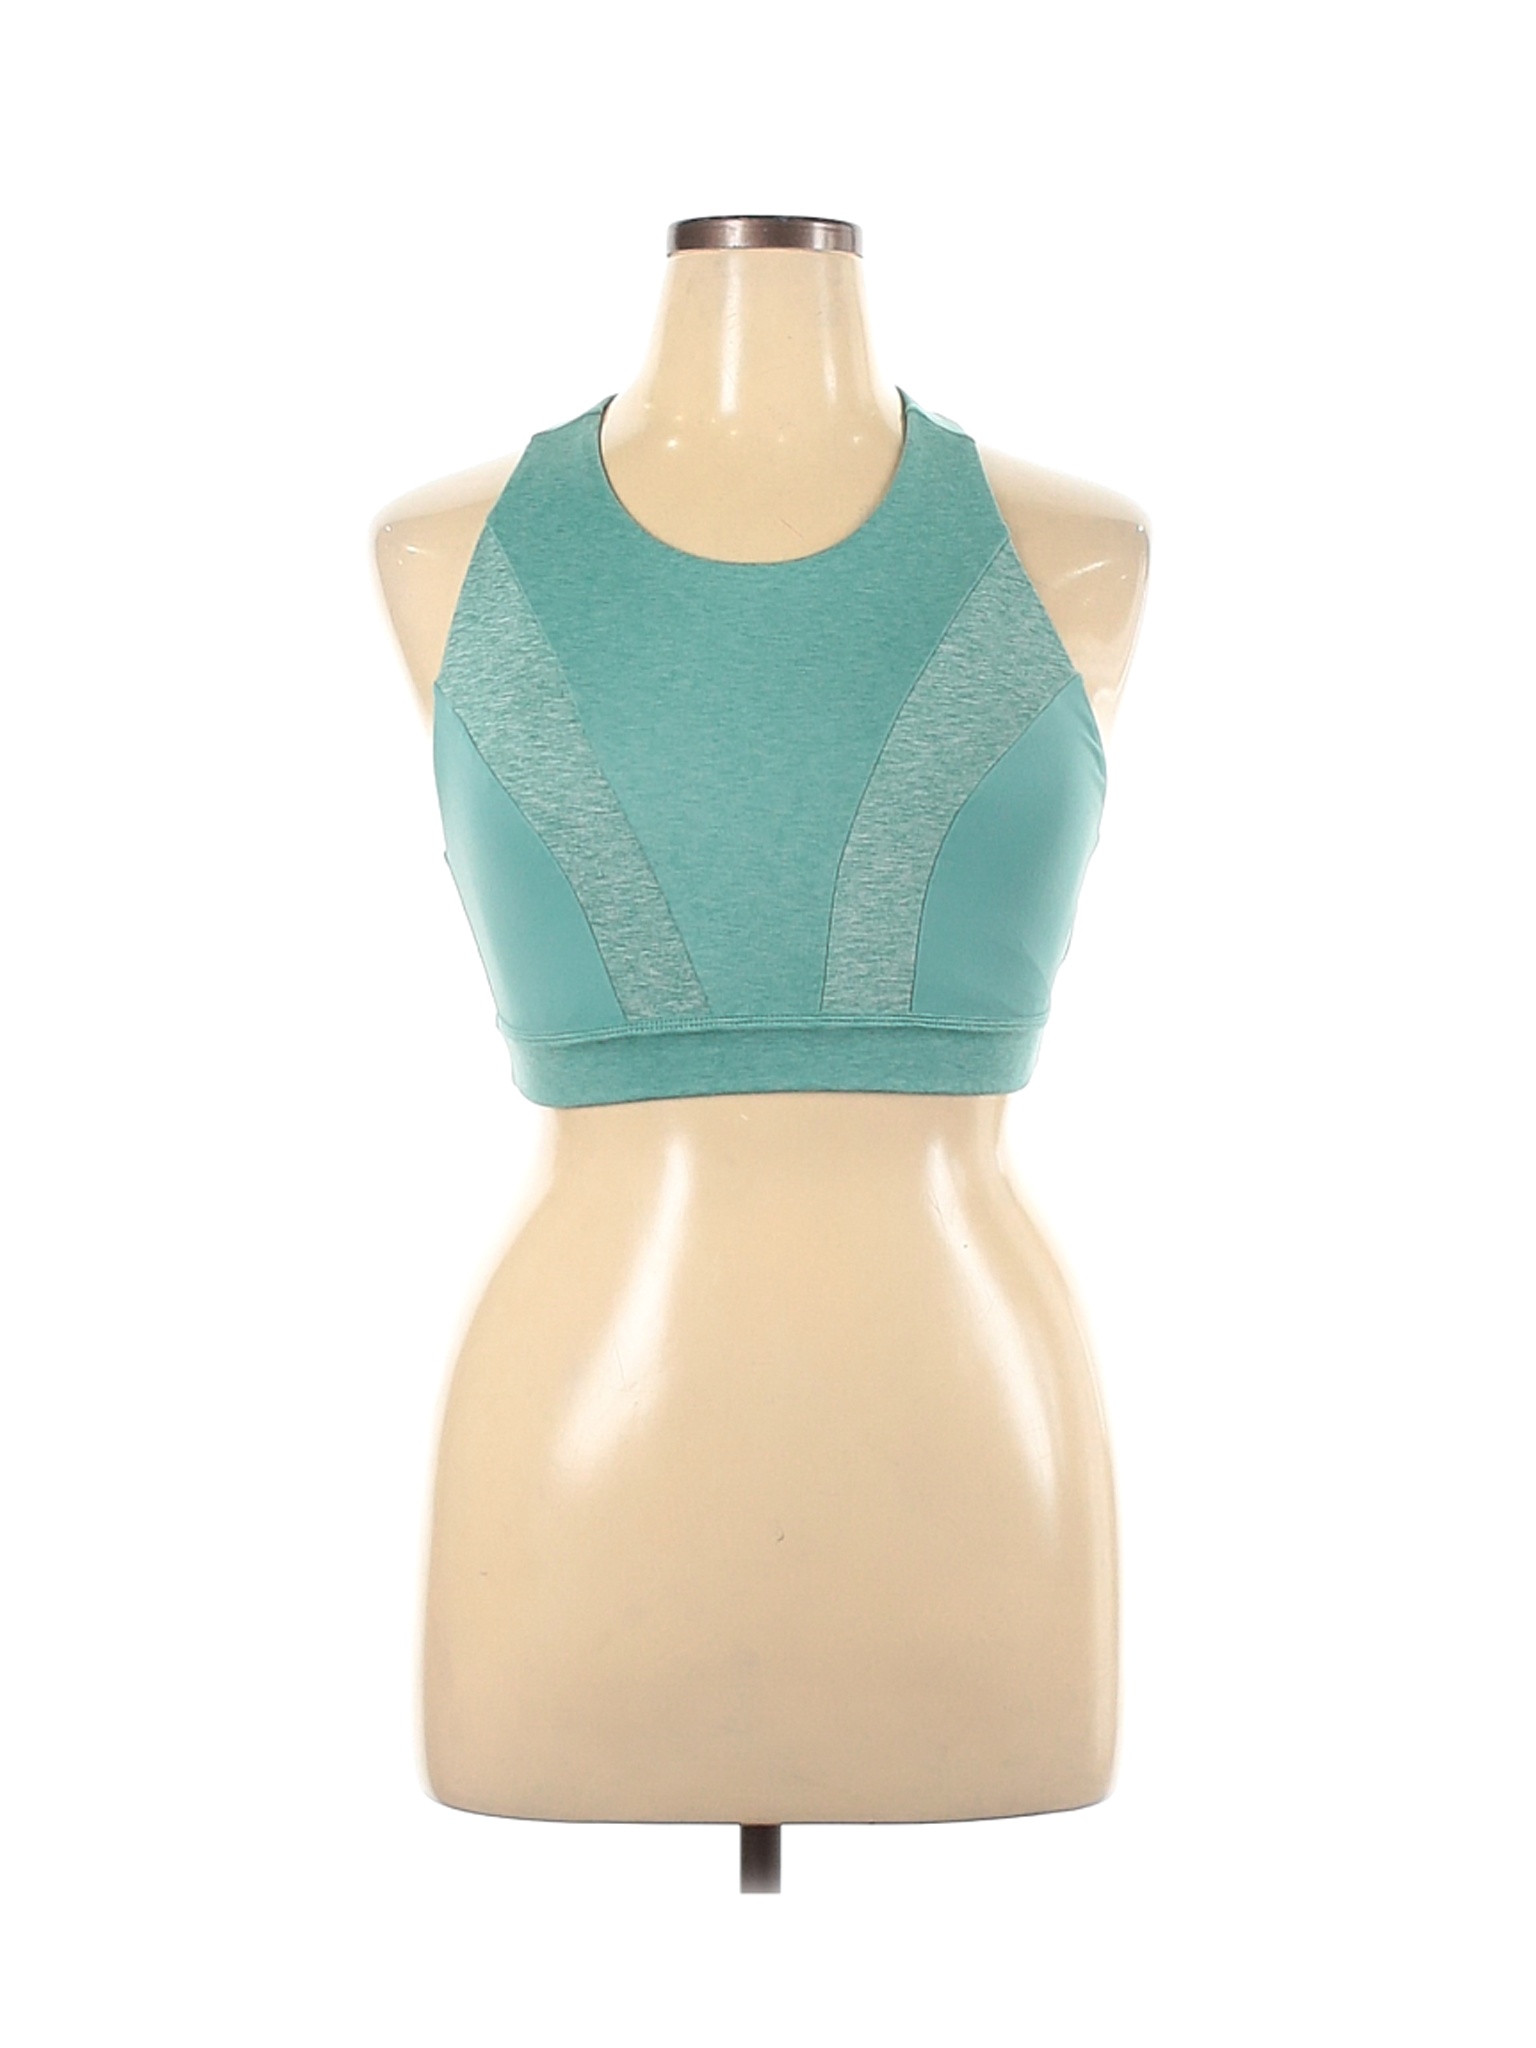 Core 10 Solid Blue Teal Sports Bra Size XL - 70% off | thredUP